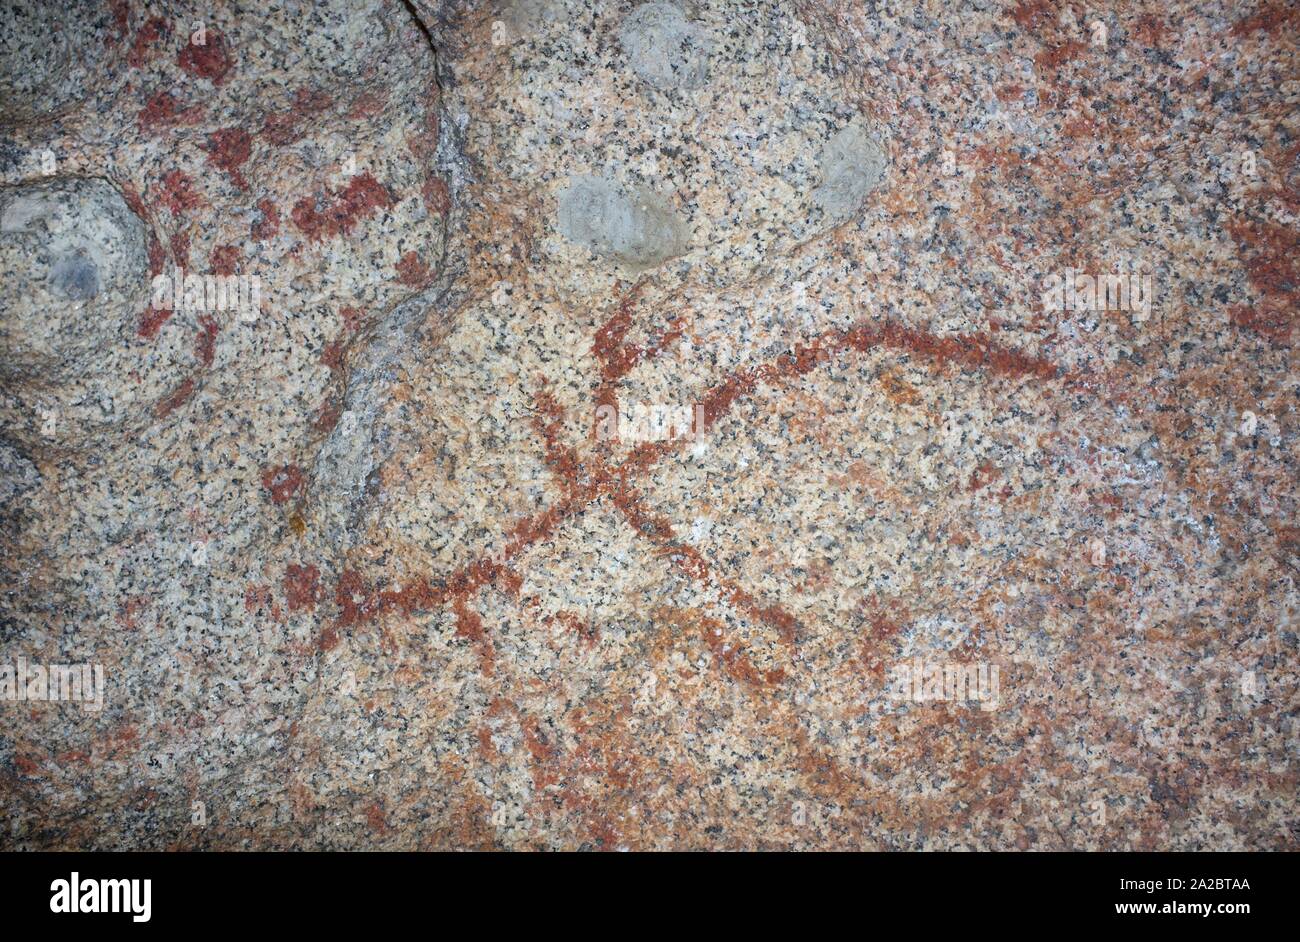 Prehistoric schematic paintings inside granite boulder at Natural Monument of Los Barruecos, Extremadura, Spain. Branch-shaped painting depicting a Stock Photo